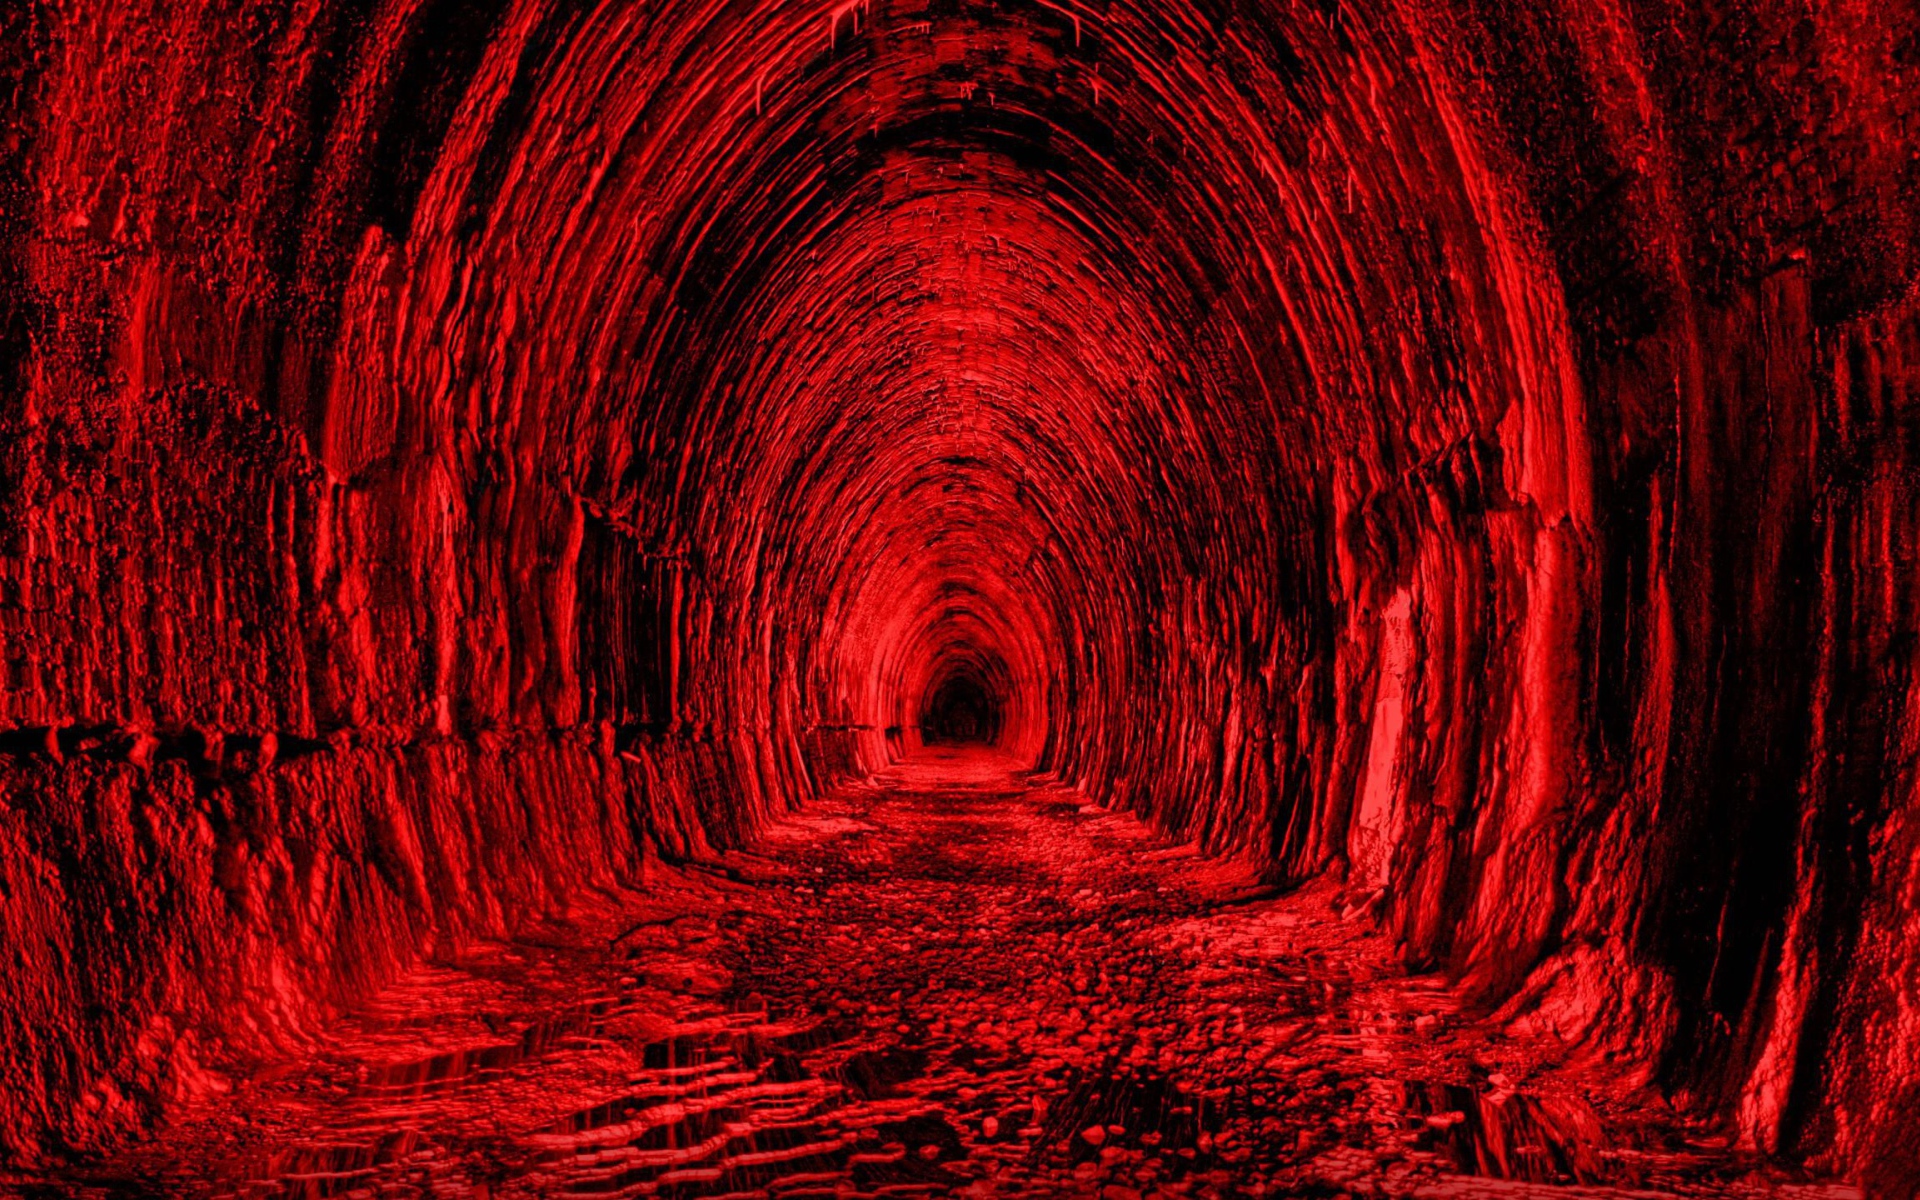 Red tunnel